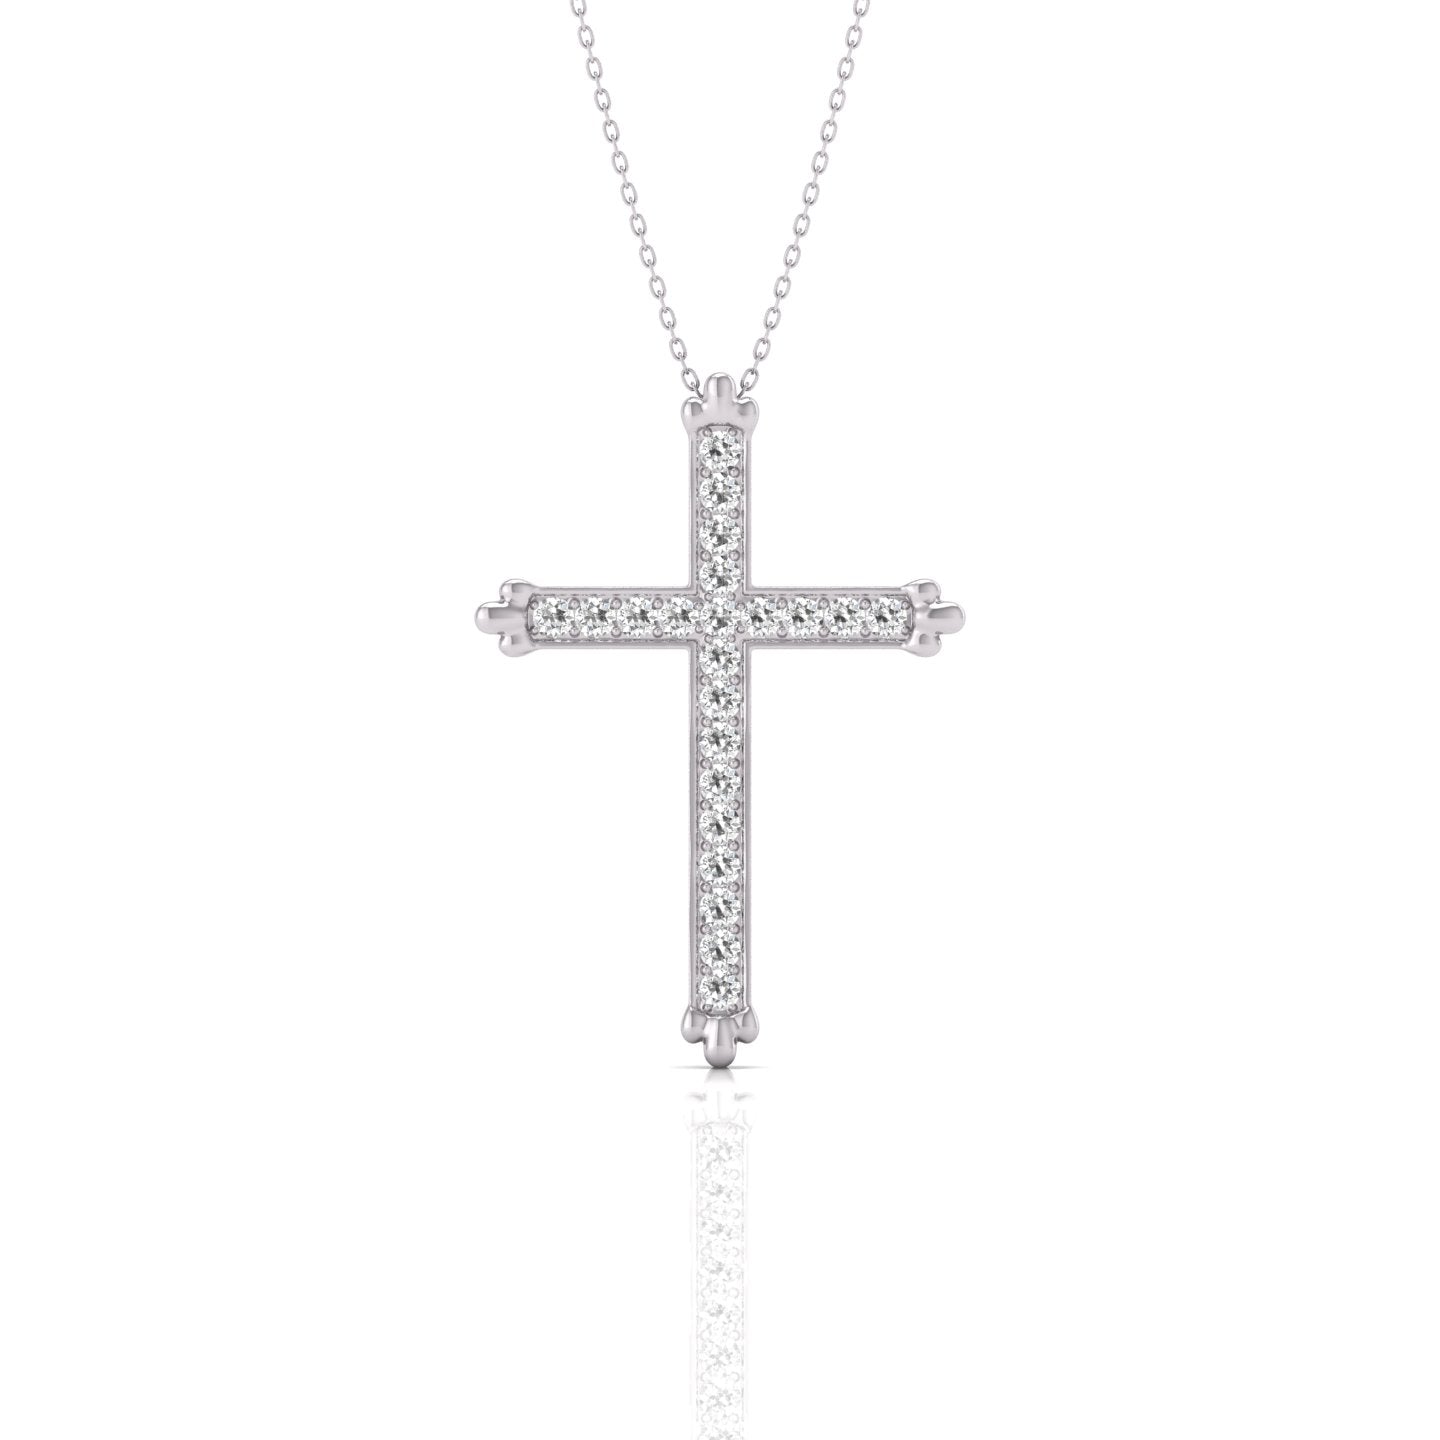 1/2 CARAT TW Natural Diamond Cross Pendant Necklace Available in 14K White and Yellow Gold